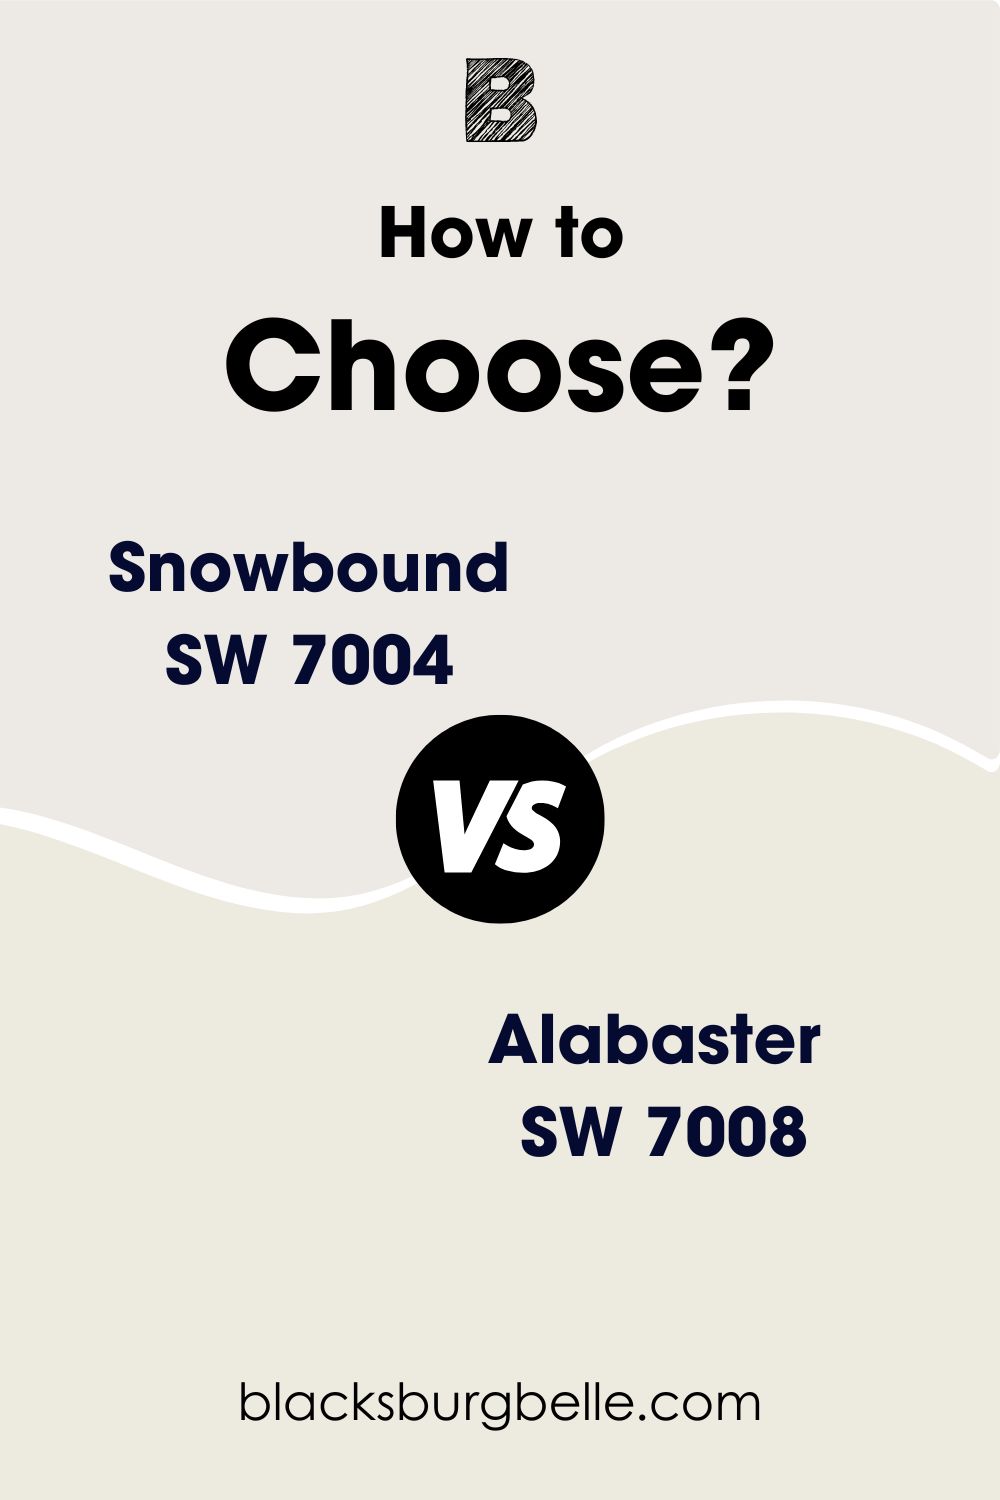 Sherwin Williams Snowbound vs Alabaster How to Choose